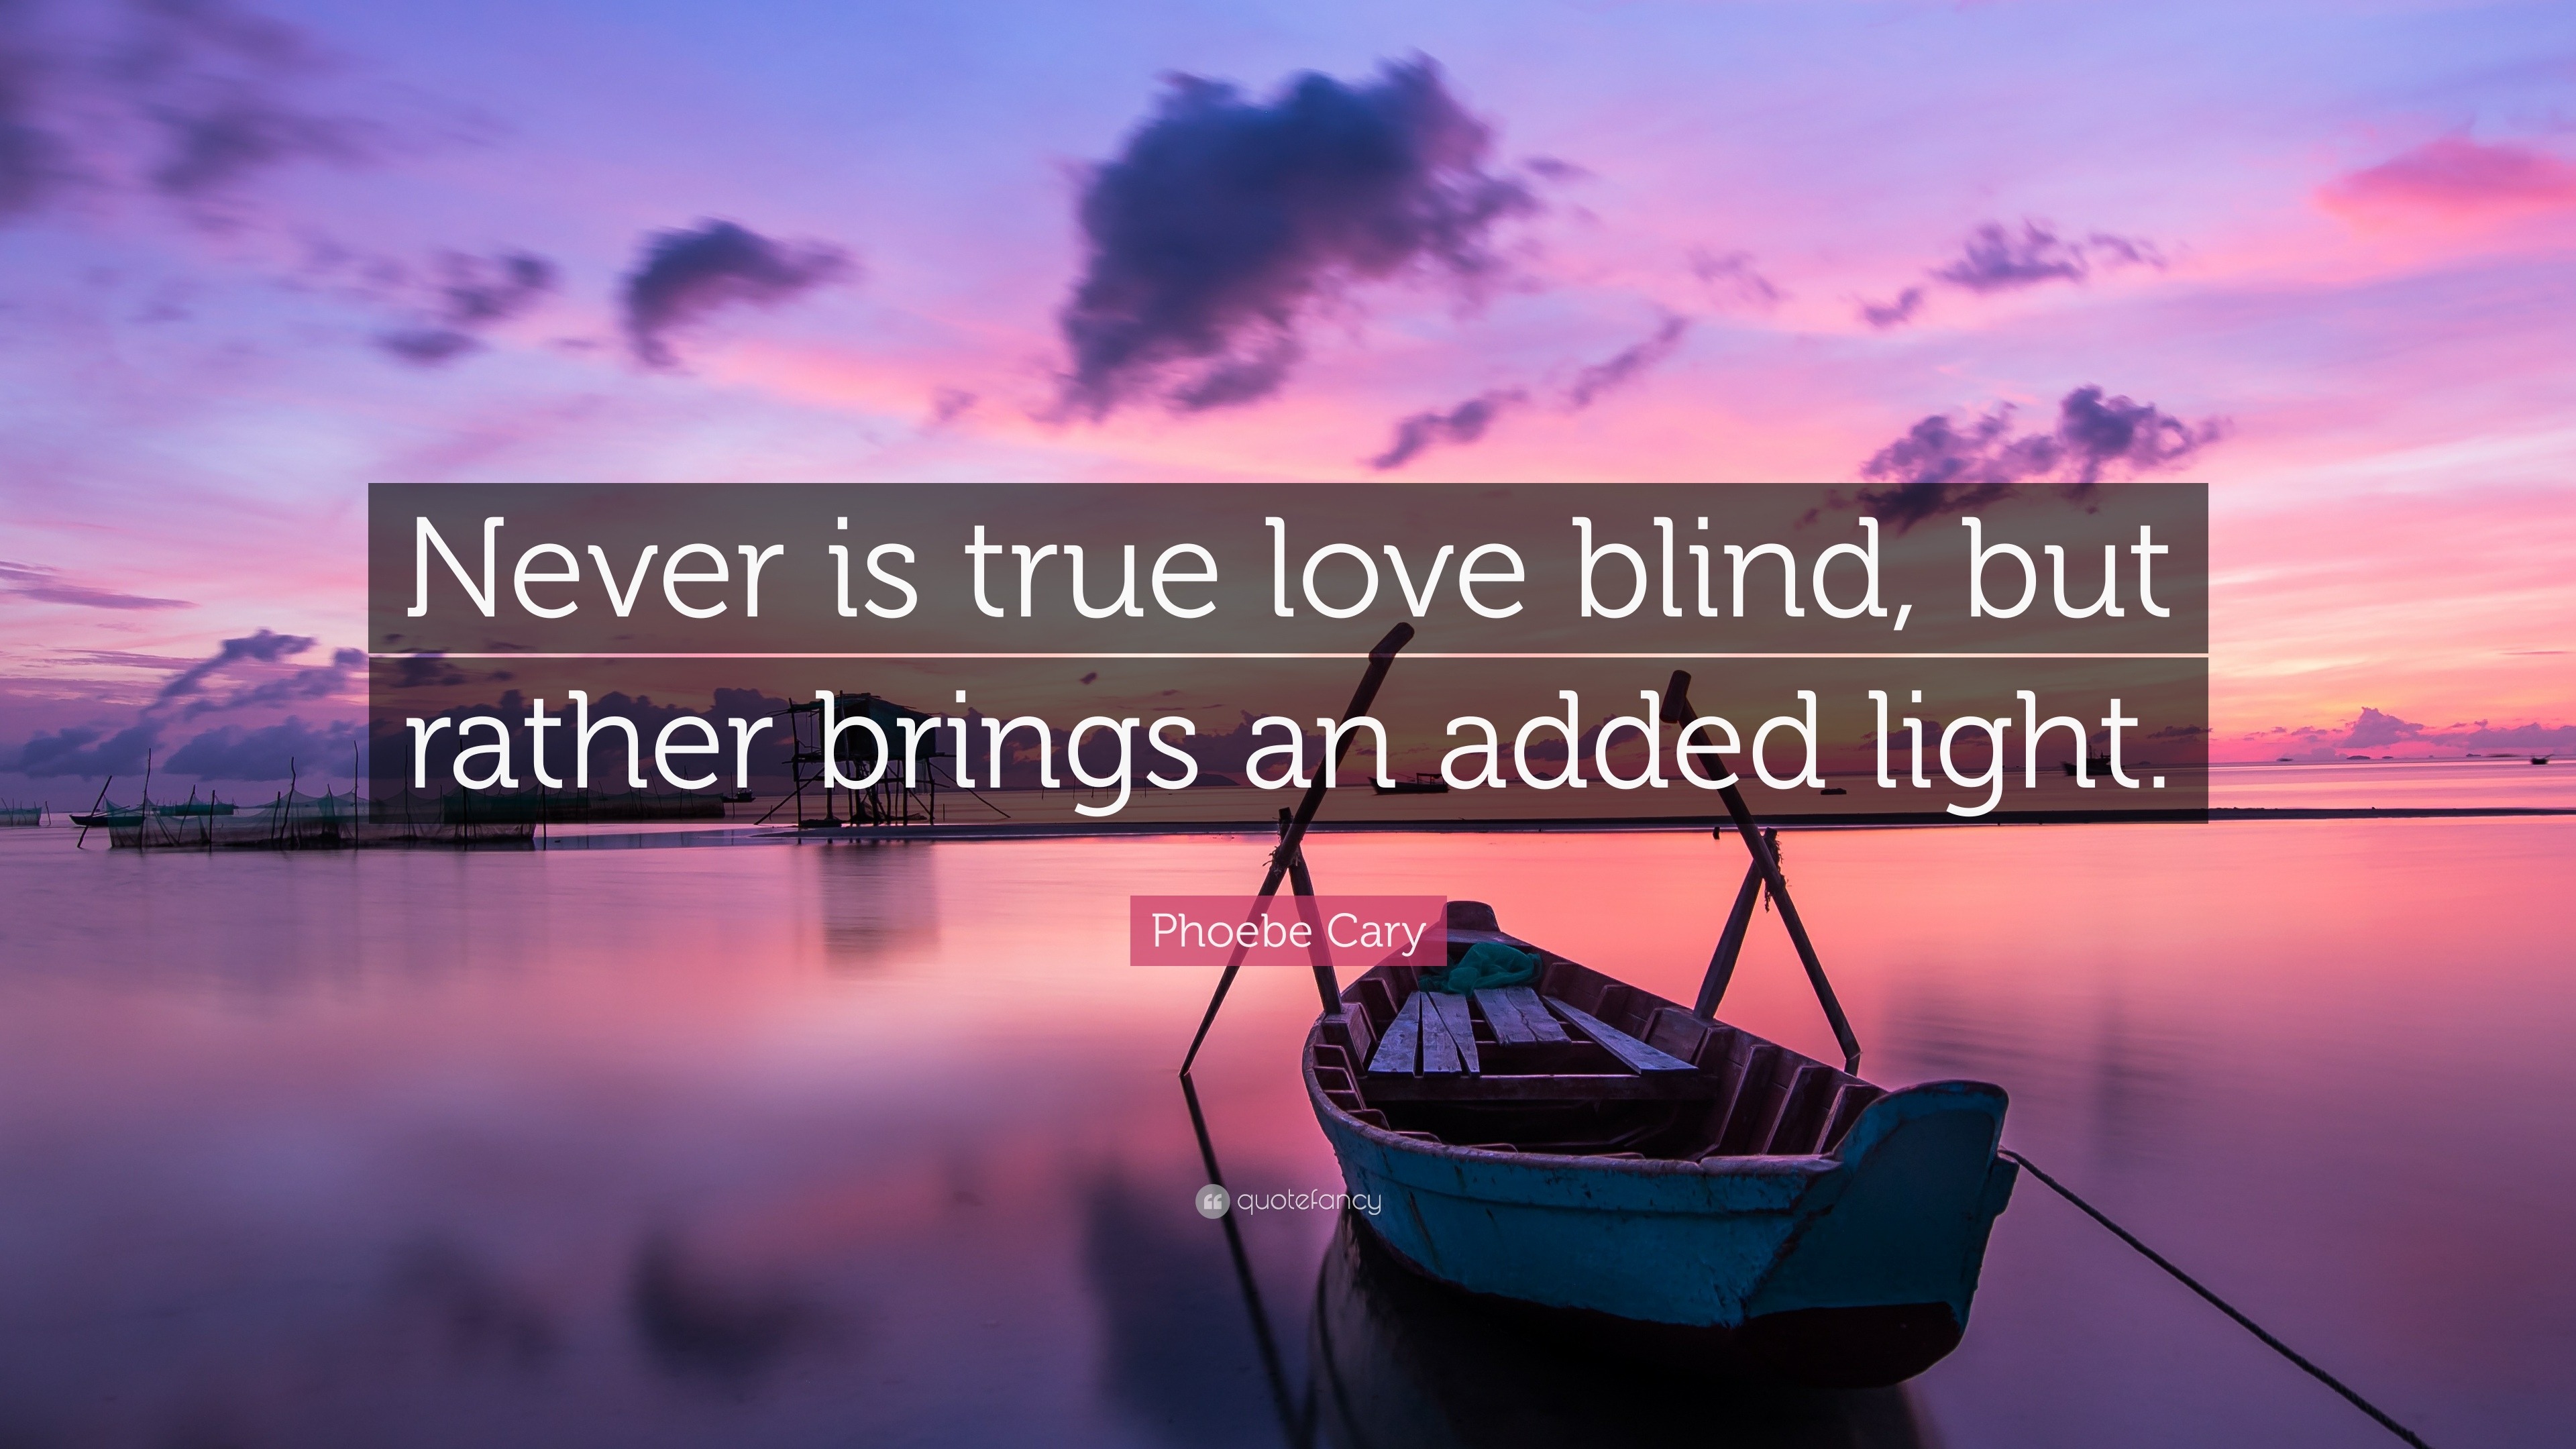 Phoebe Cary Quote “Never is true love blind but rather brings an added